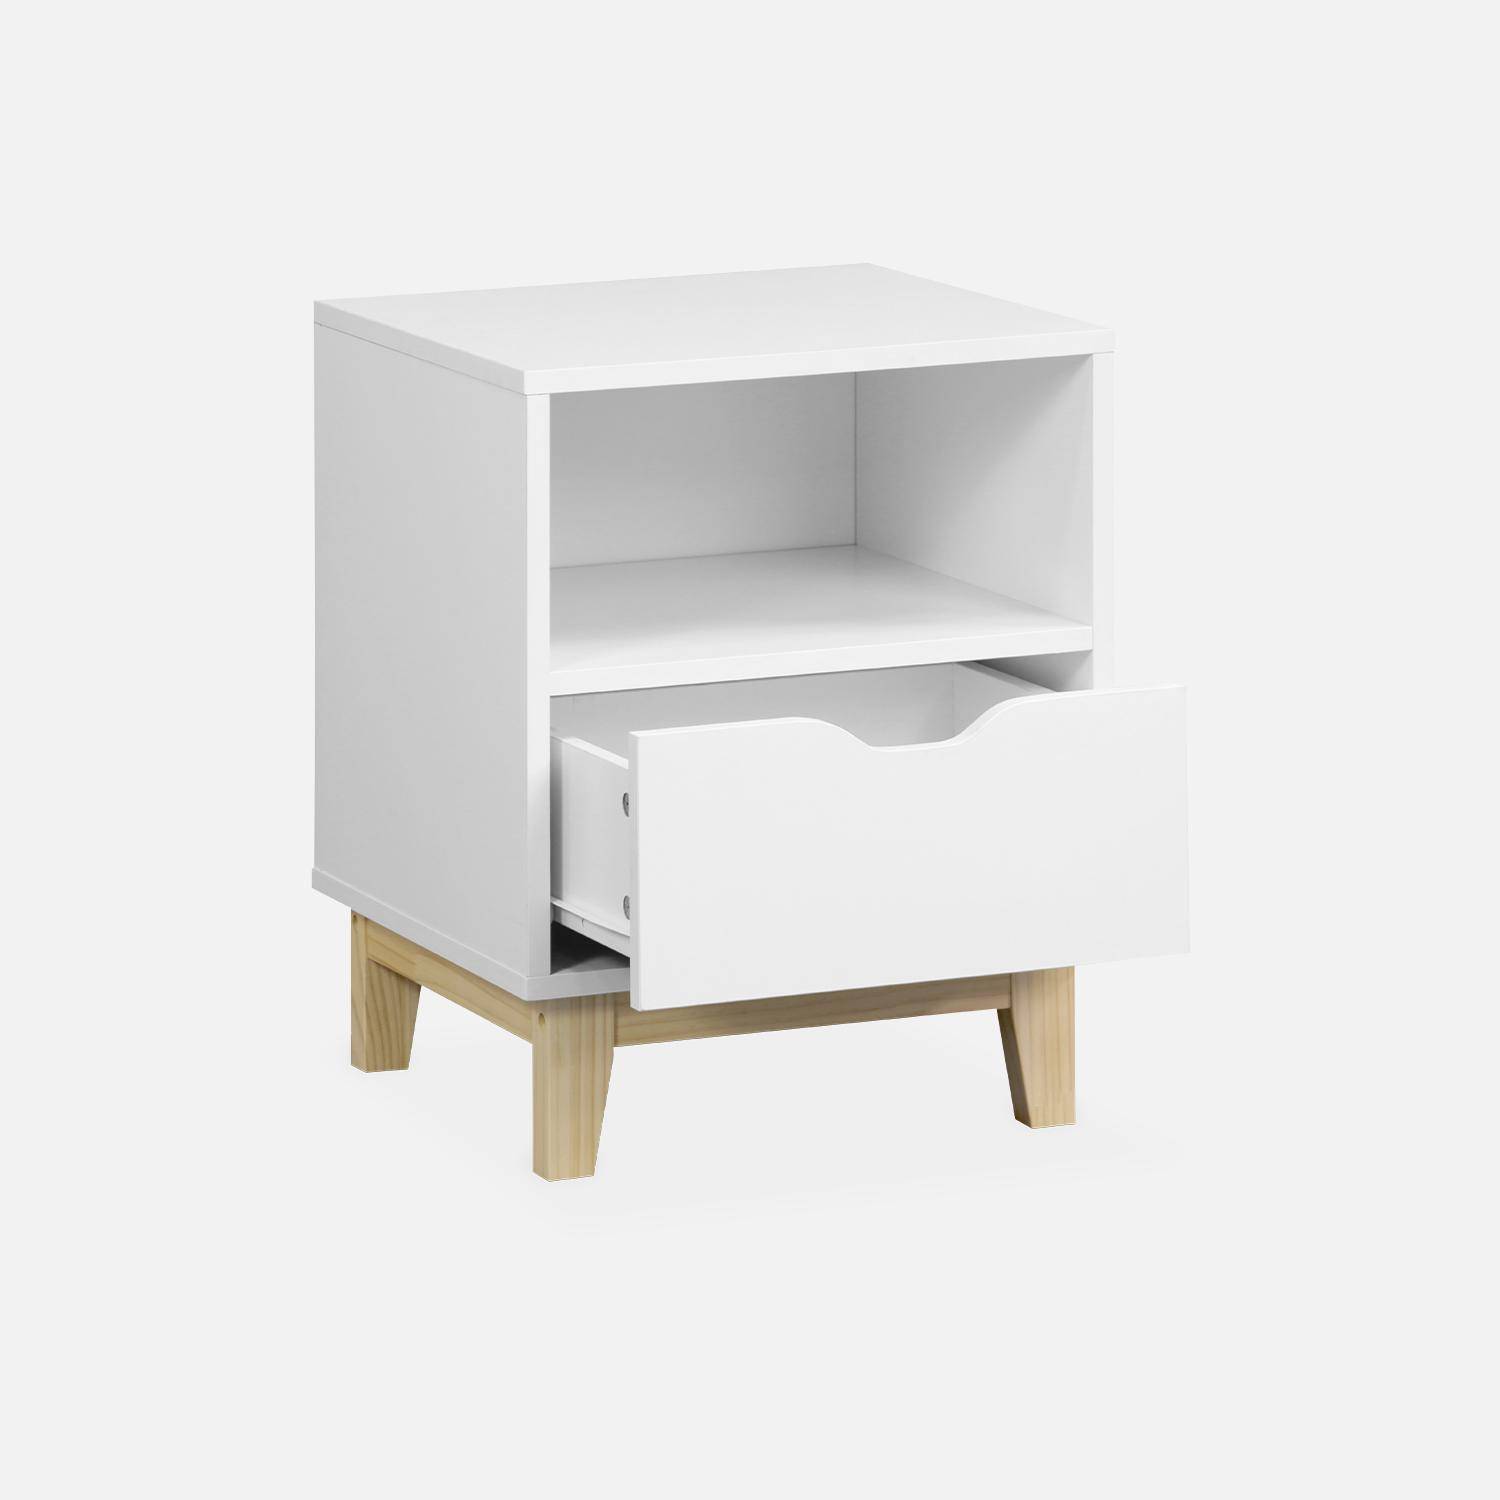 White bedside table with fir wood legs - Floki - 40 x 39 x 52cm - 1 drawer and 1 niche,sweeek,Photo3